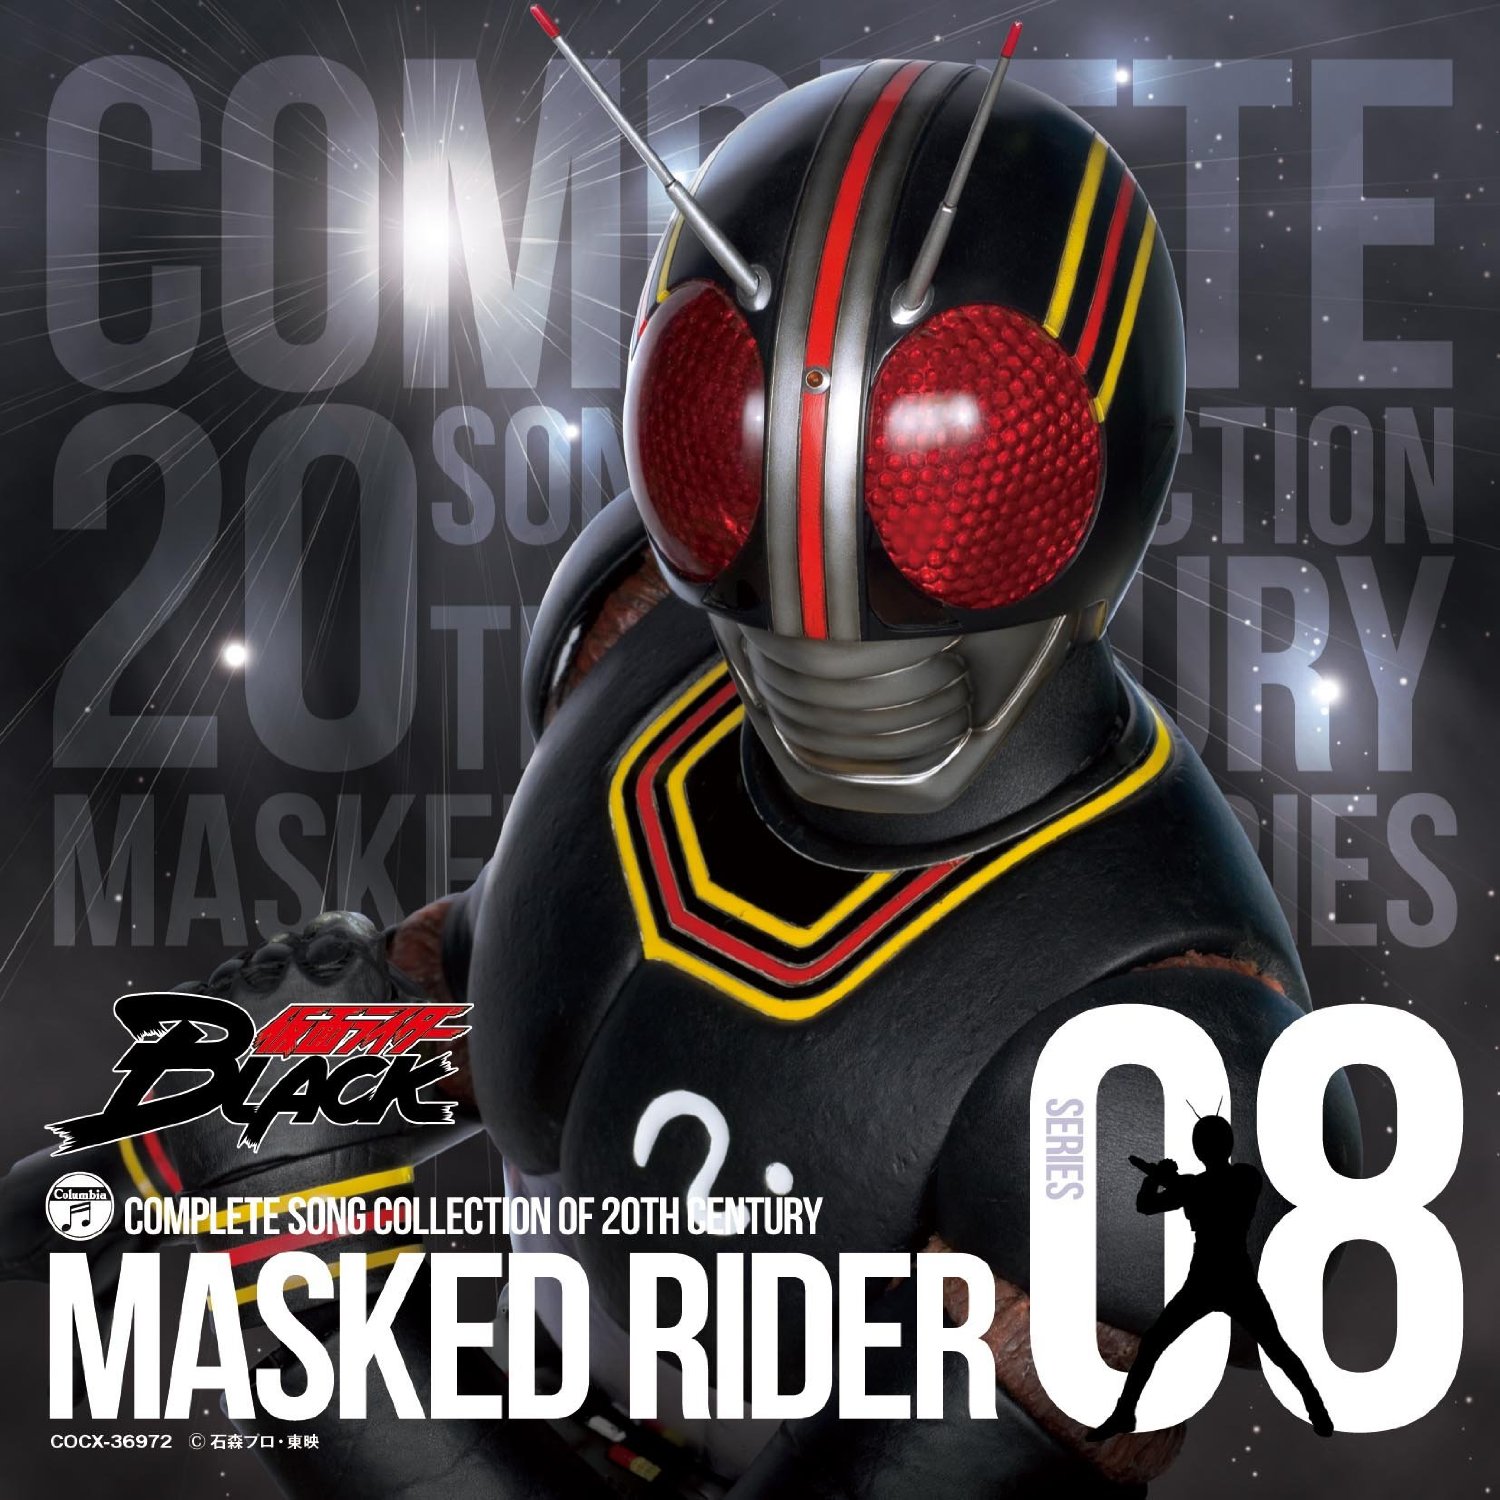 Release “COMPLETE SONG COLLECTION OF 20TH CENTURY MASKED RIDER 